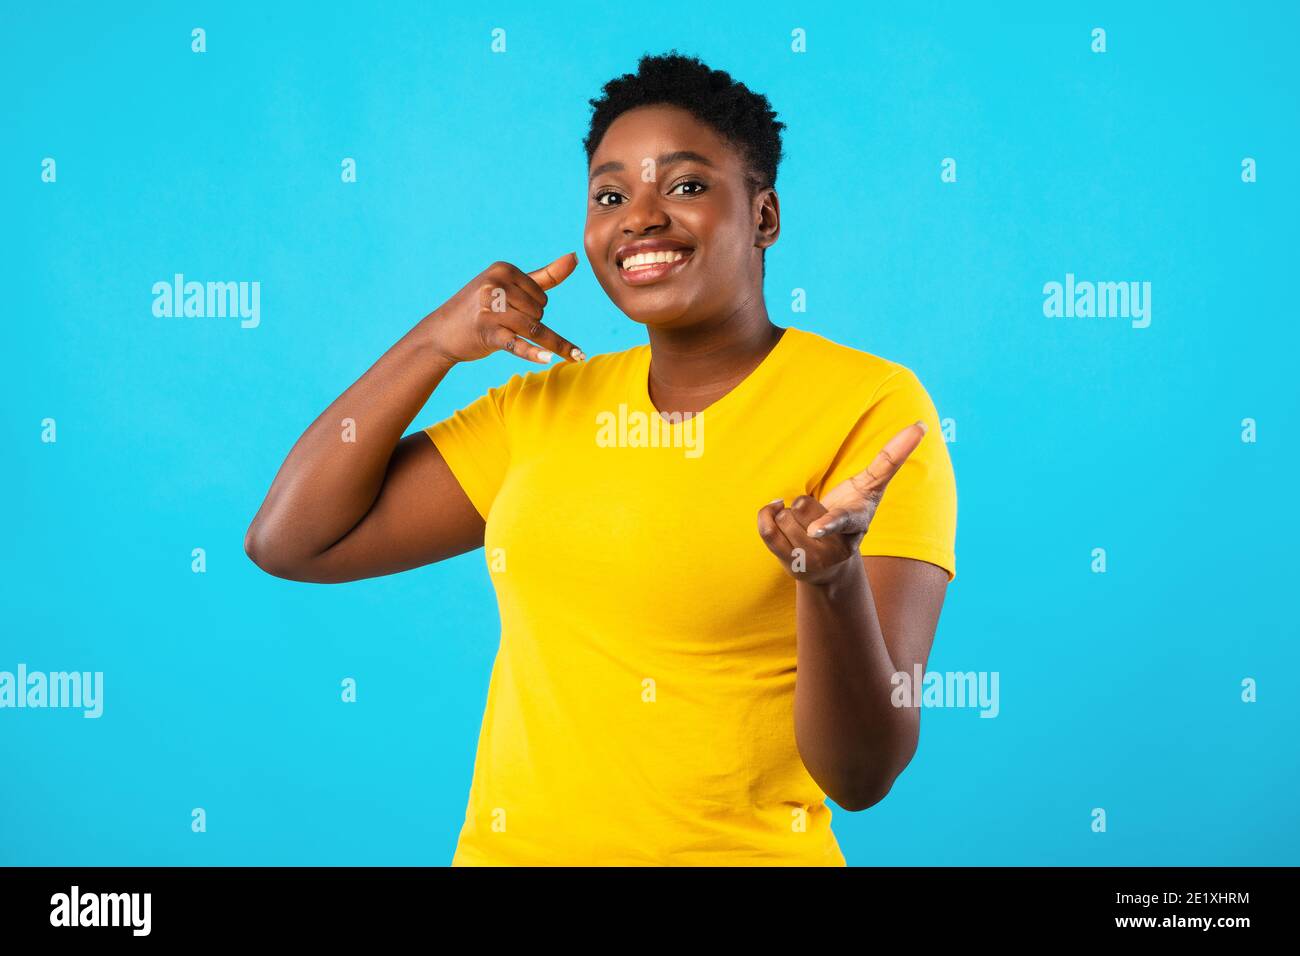 Plus-Size African Woman Gesturing Call Me Over Blue Background Stock Photo